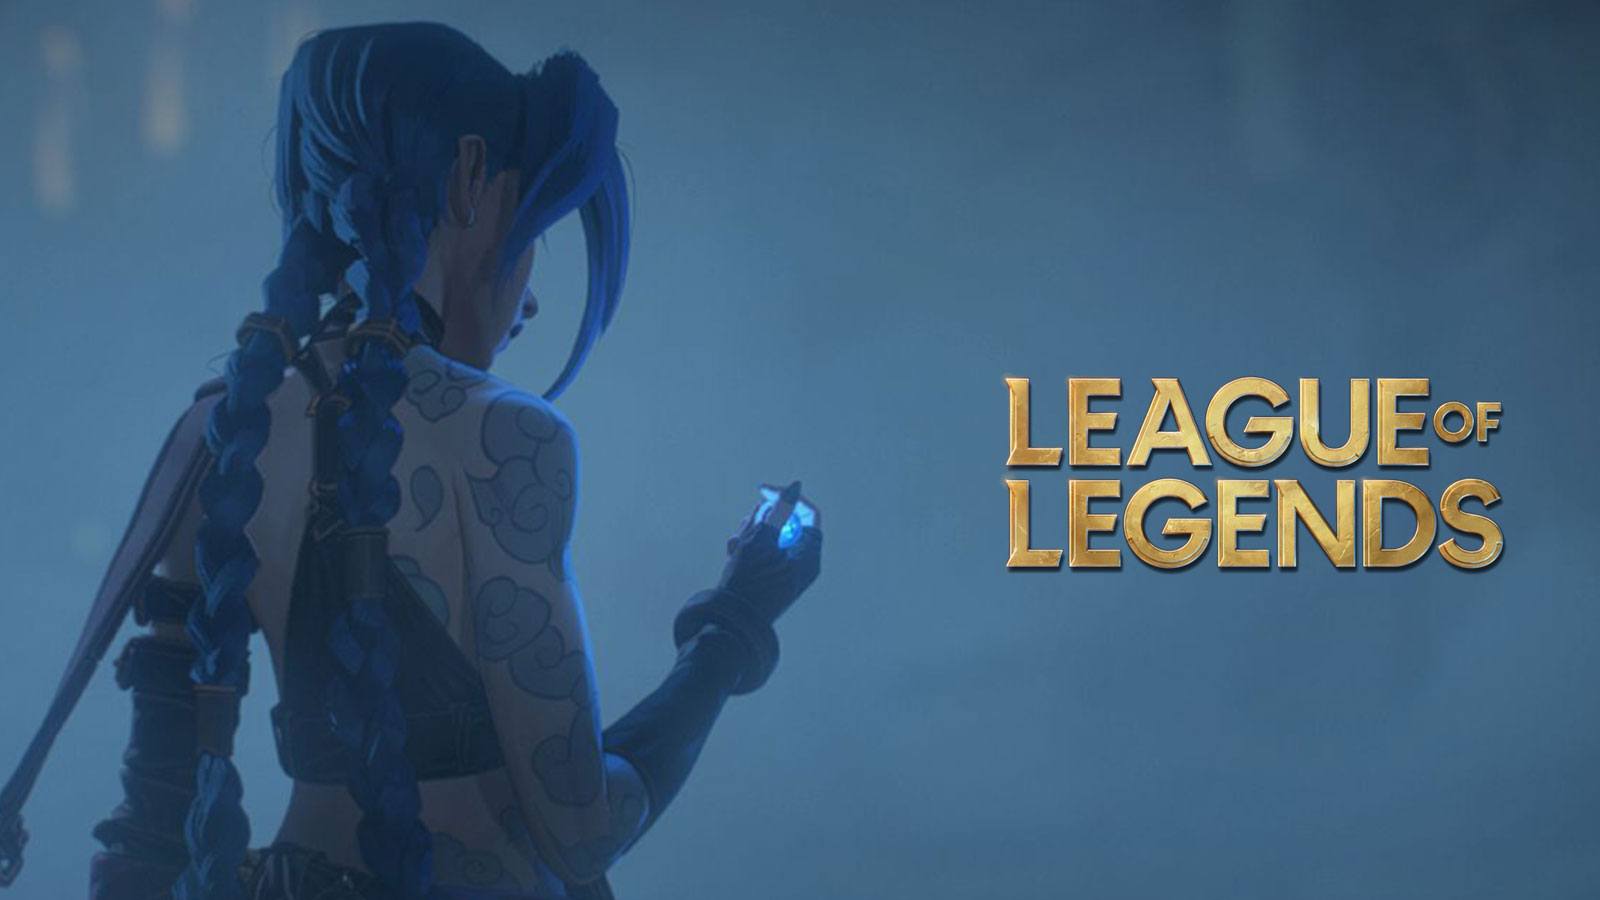 Riot is already planning other series on LoL after Arcane